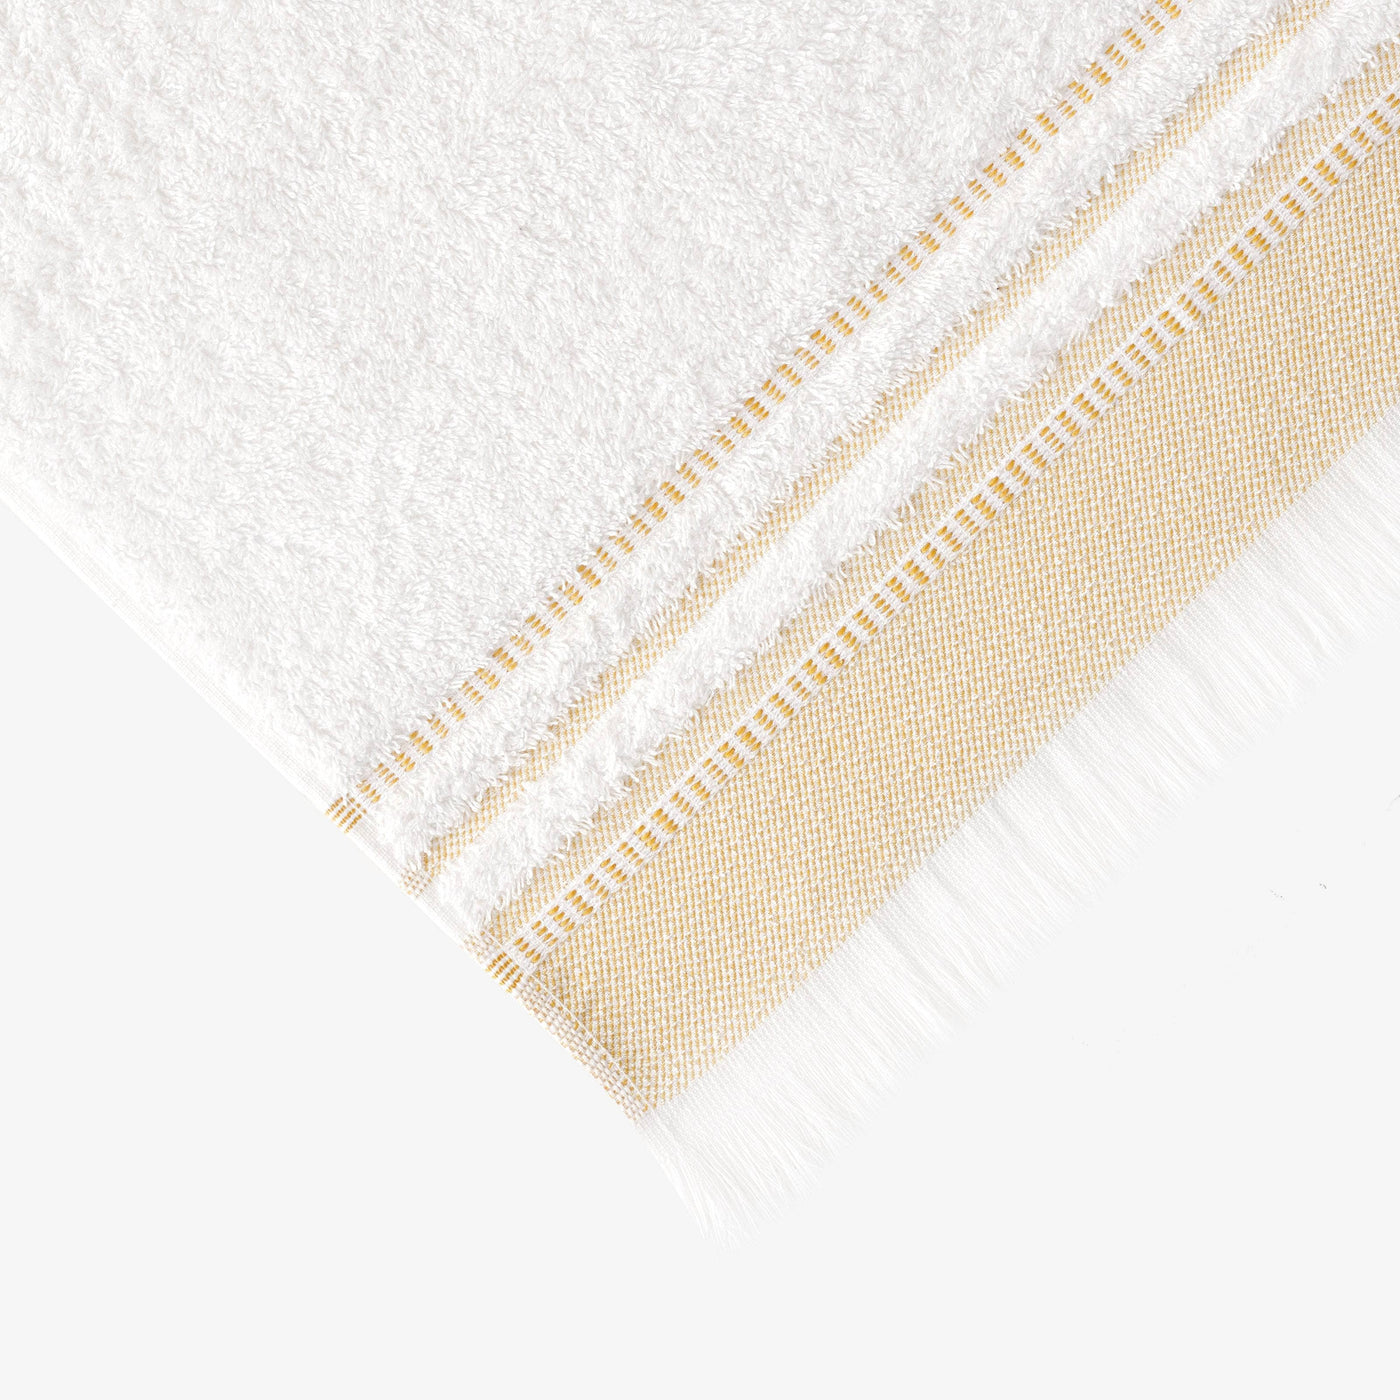 Betty Set of 2 Border Striped 100% Turkish Cotton Hand Towels, Off-White - Mustard Hand Towels sazy.com